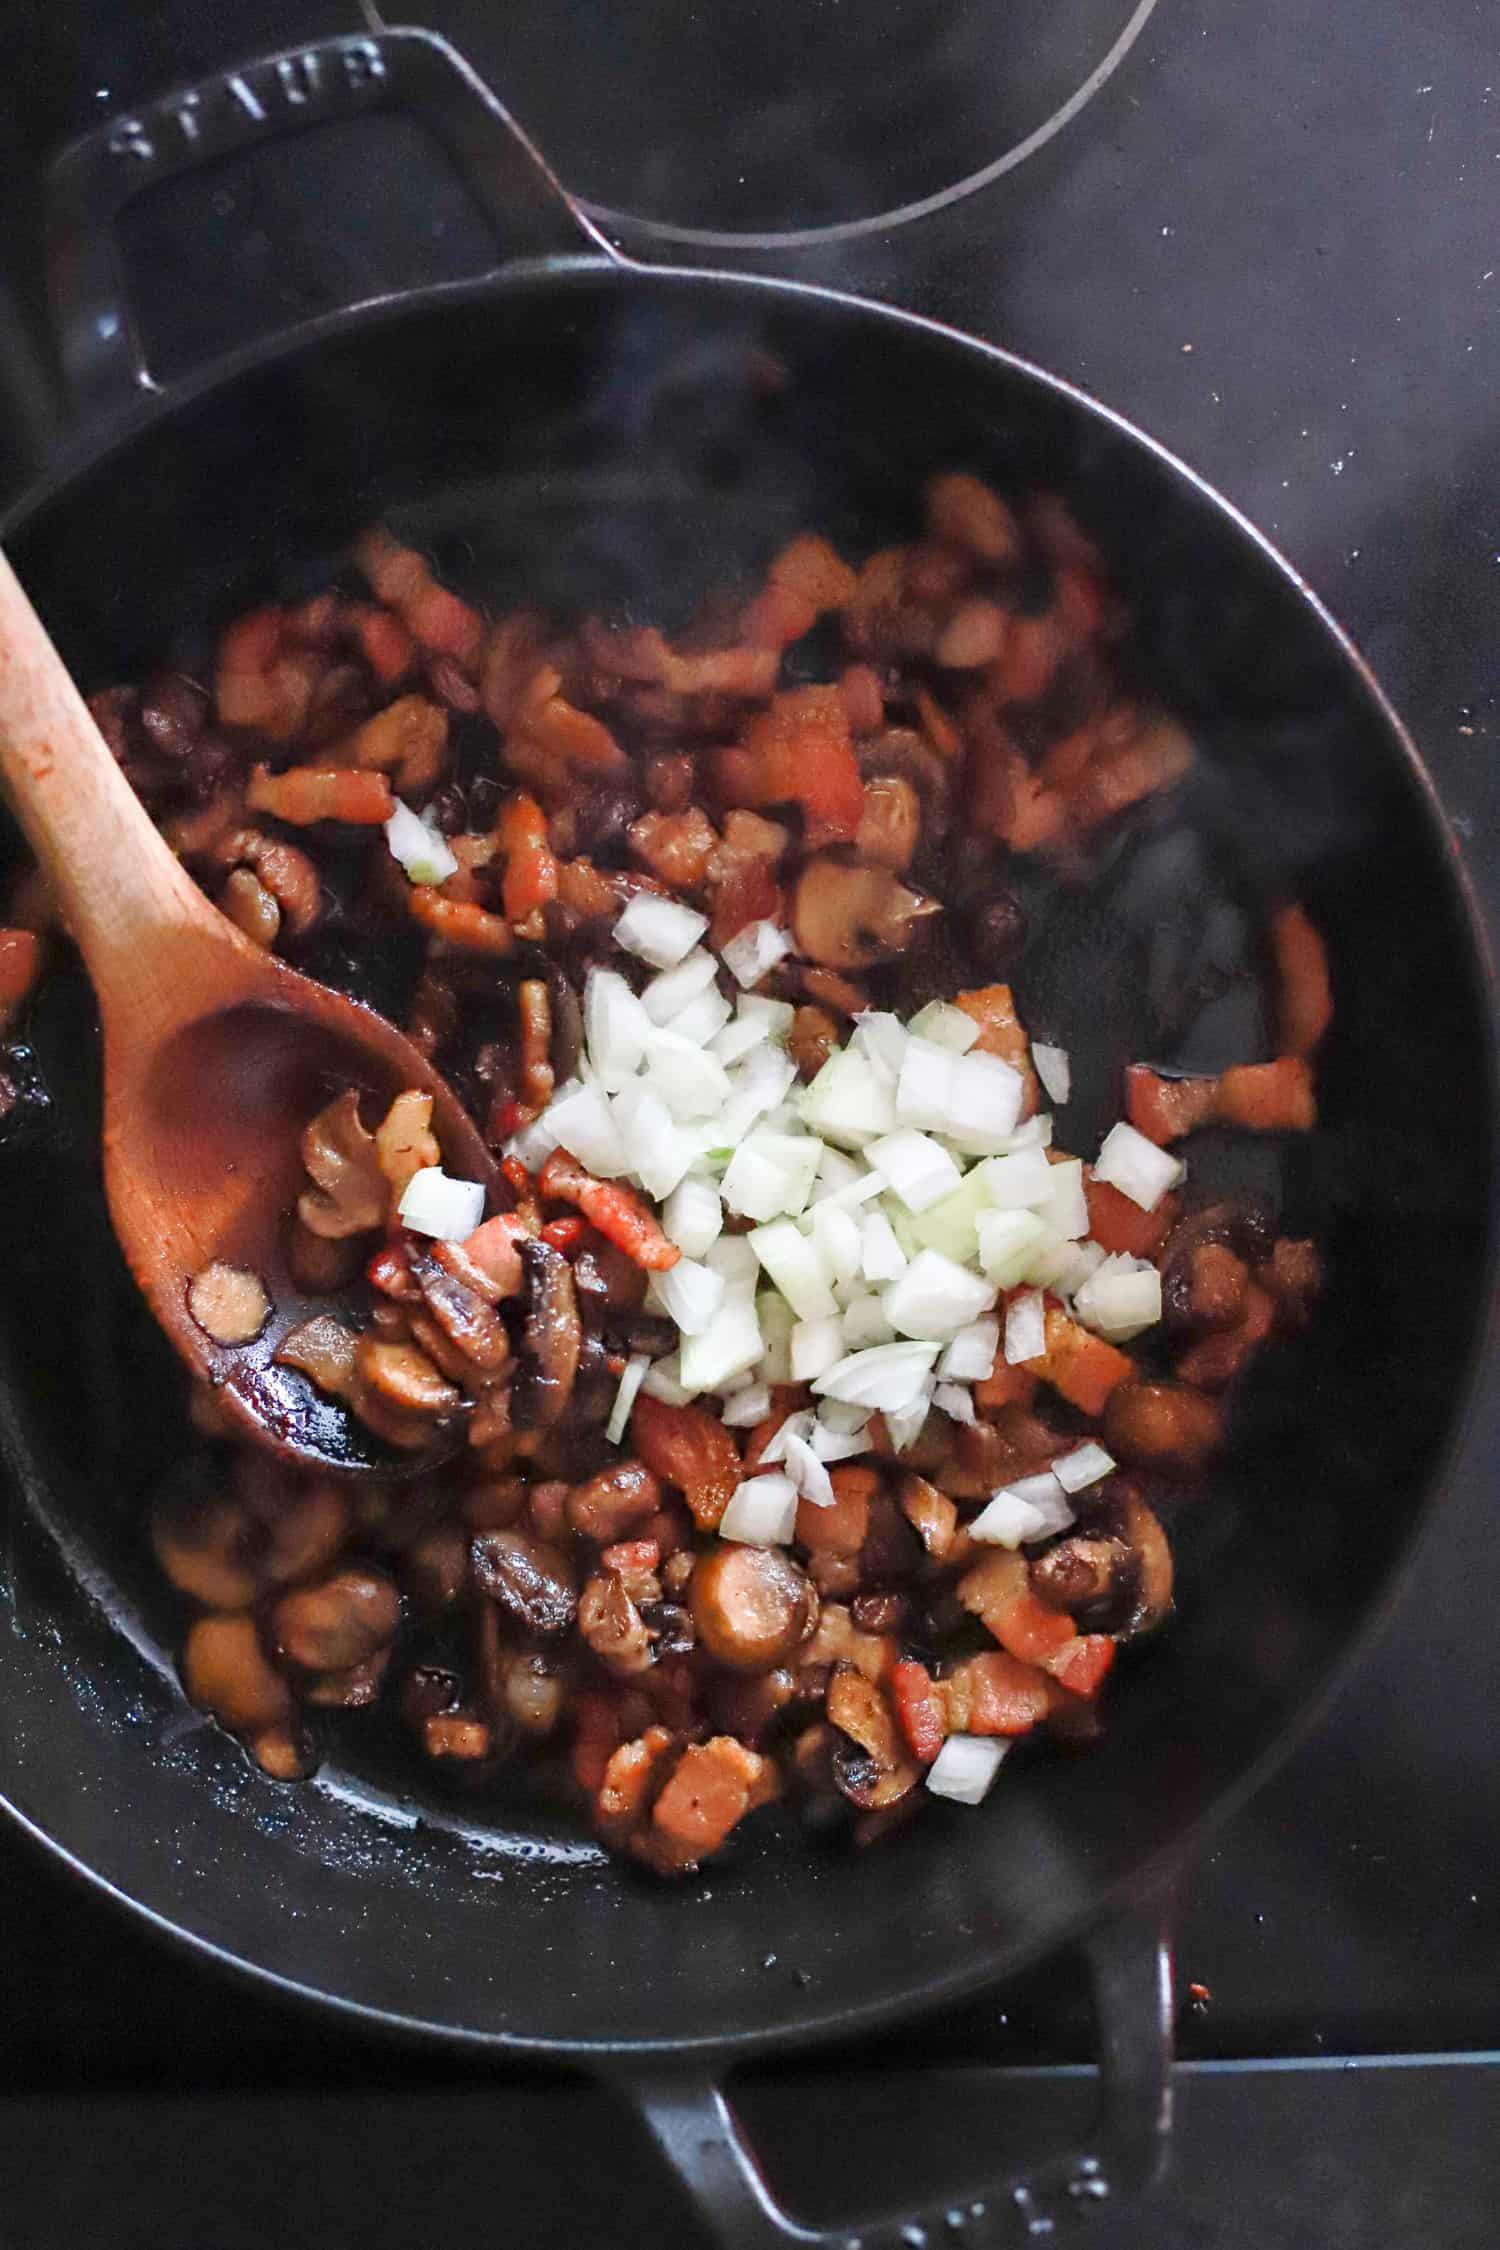 mushrooms, onions, and bacon crisping in a skillet with wooden spoon.